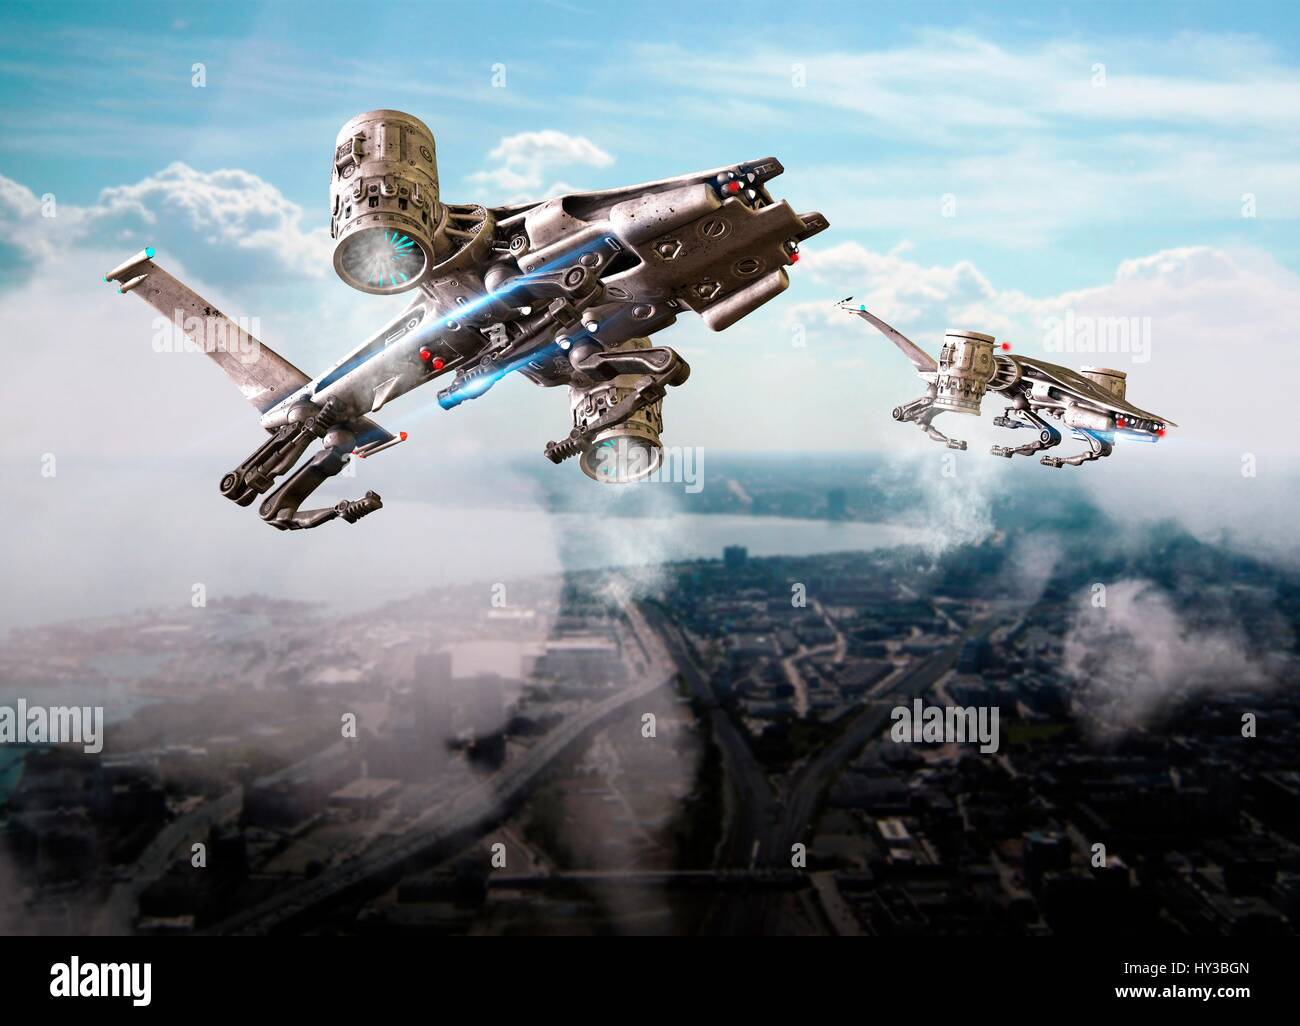 Drones flying over futuristic city, illustration. Stock Photo